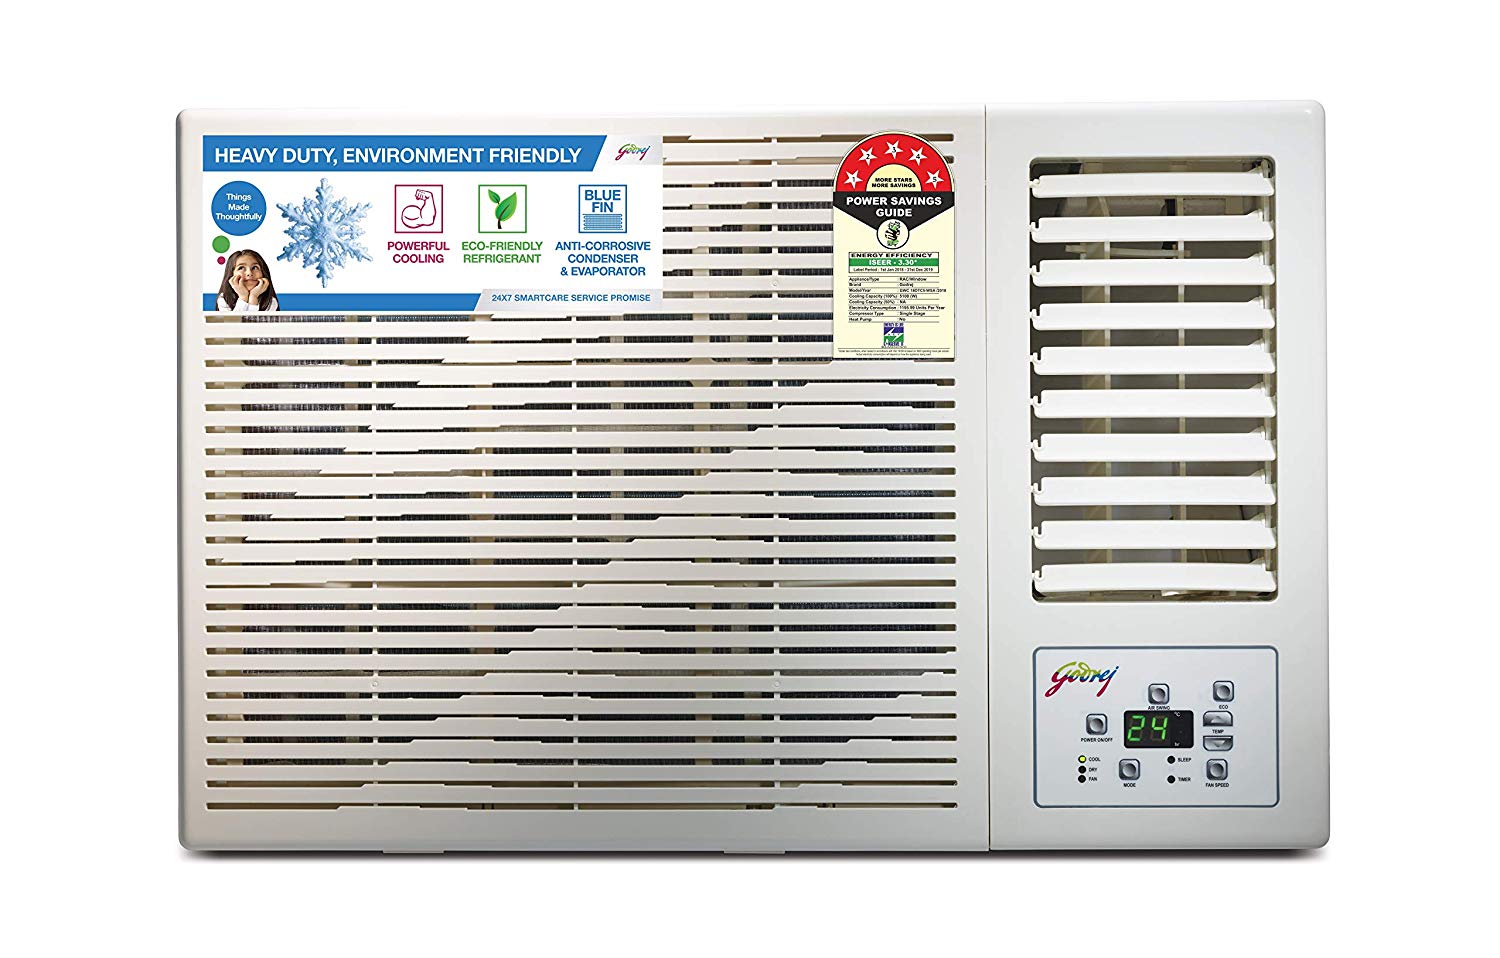 Window AC; 1.5 ton capacity
Energy Rating: 5 Star
Warranty: 1 year on product, 1 year on condenser, 5 years on compressor
100% COPPER CONDENSER
POWERFUL COOLING
ANTI-DUST FILTER
Cool/Auto/Dry/Fan/Sleep/ECO
5 YEAR WARRANTY ON COMPRESSOR FIXED SPEED COMPRESSOR
SILENT OPERATION